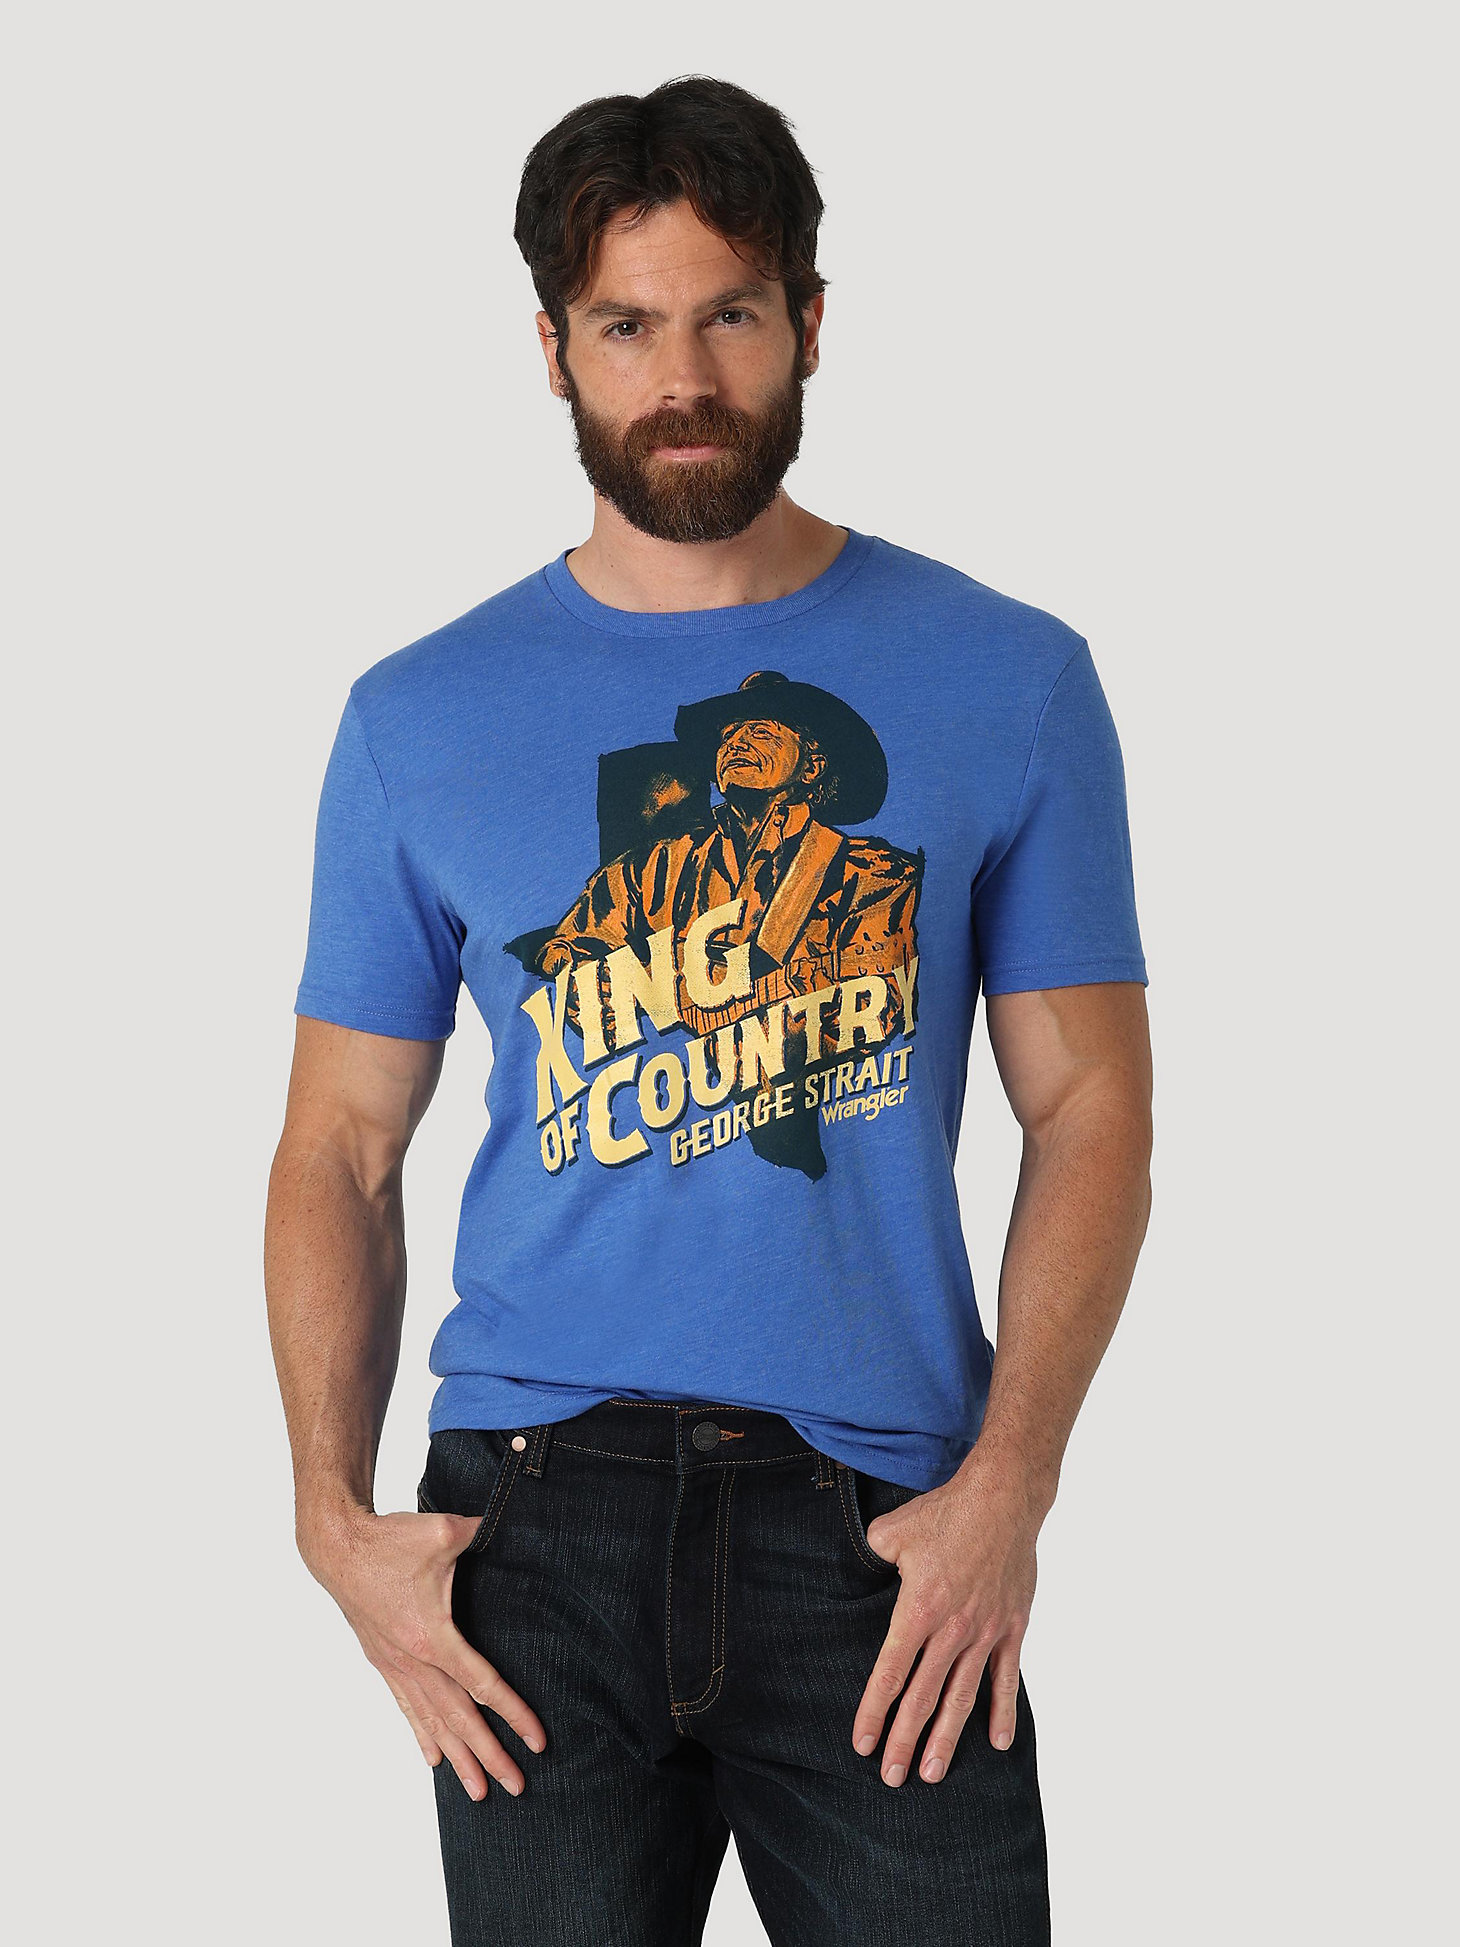 Men's George Strait Simple King of Country Graphic T-Shirt in Royal Blue Heather main view